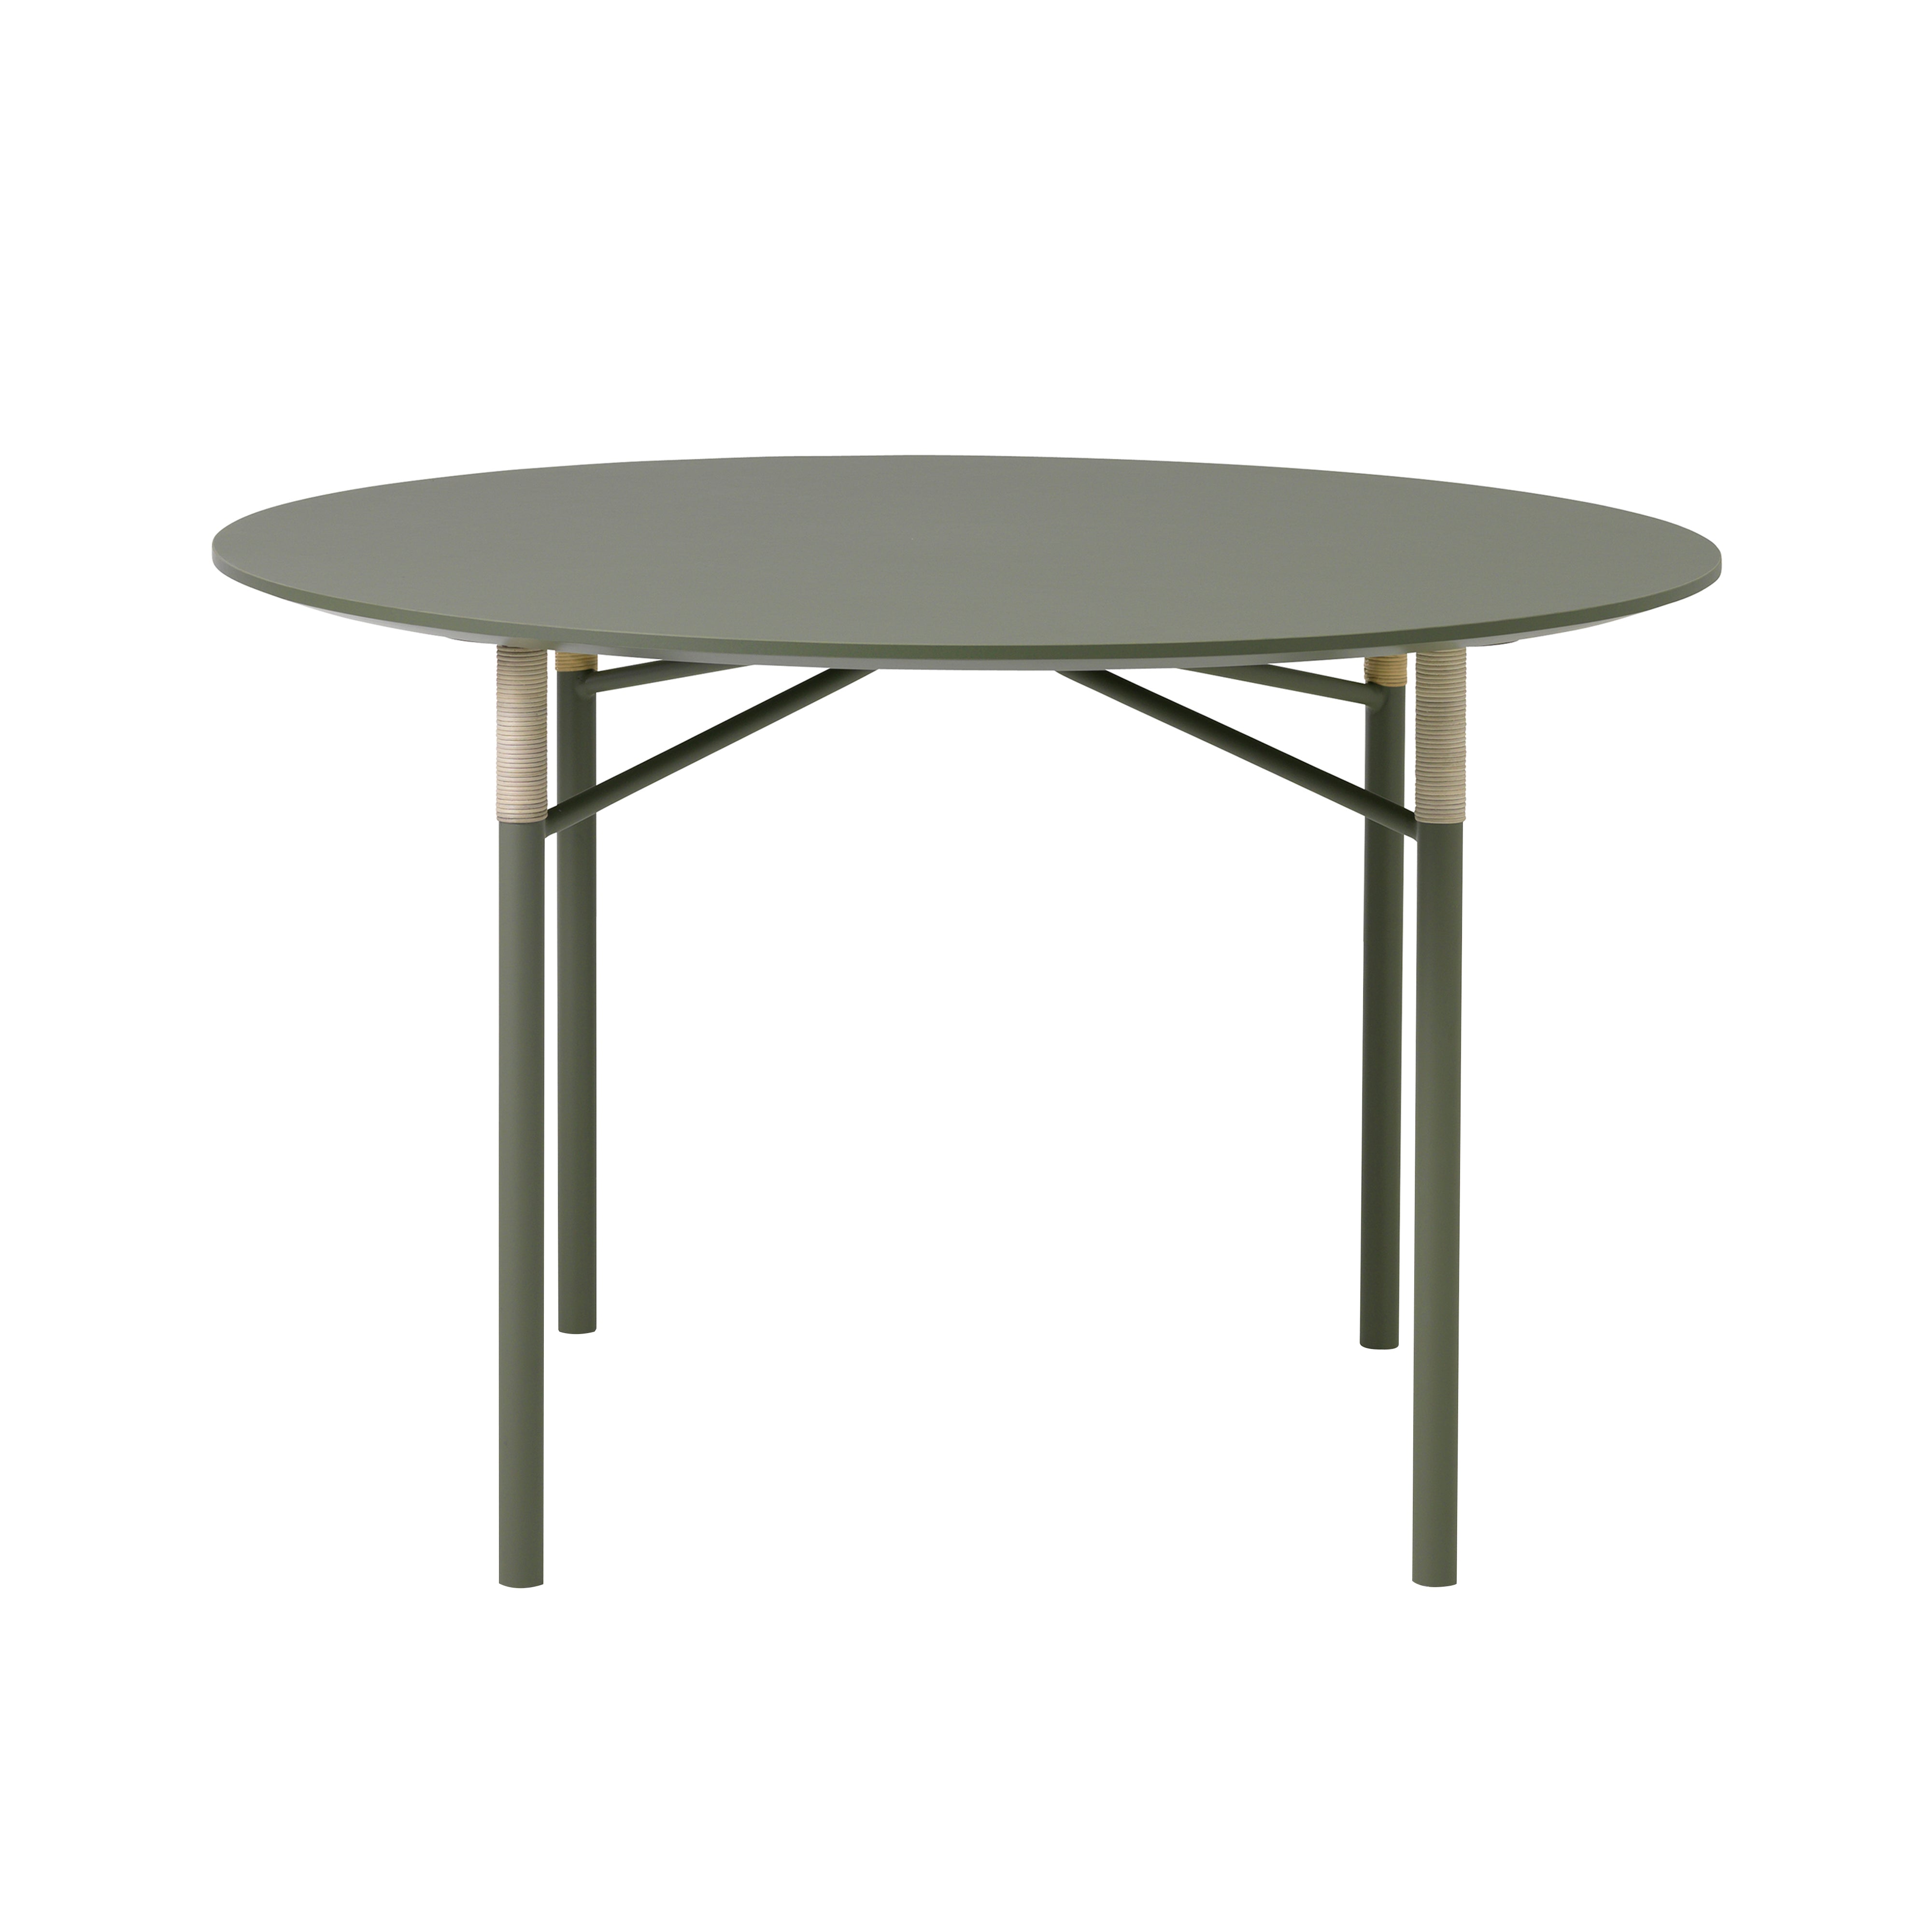 Affinity Dining Table: Round + Light Green